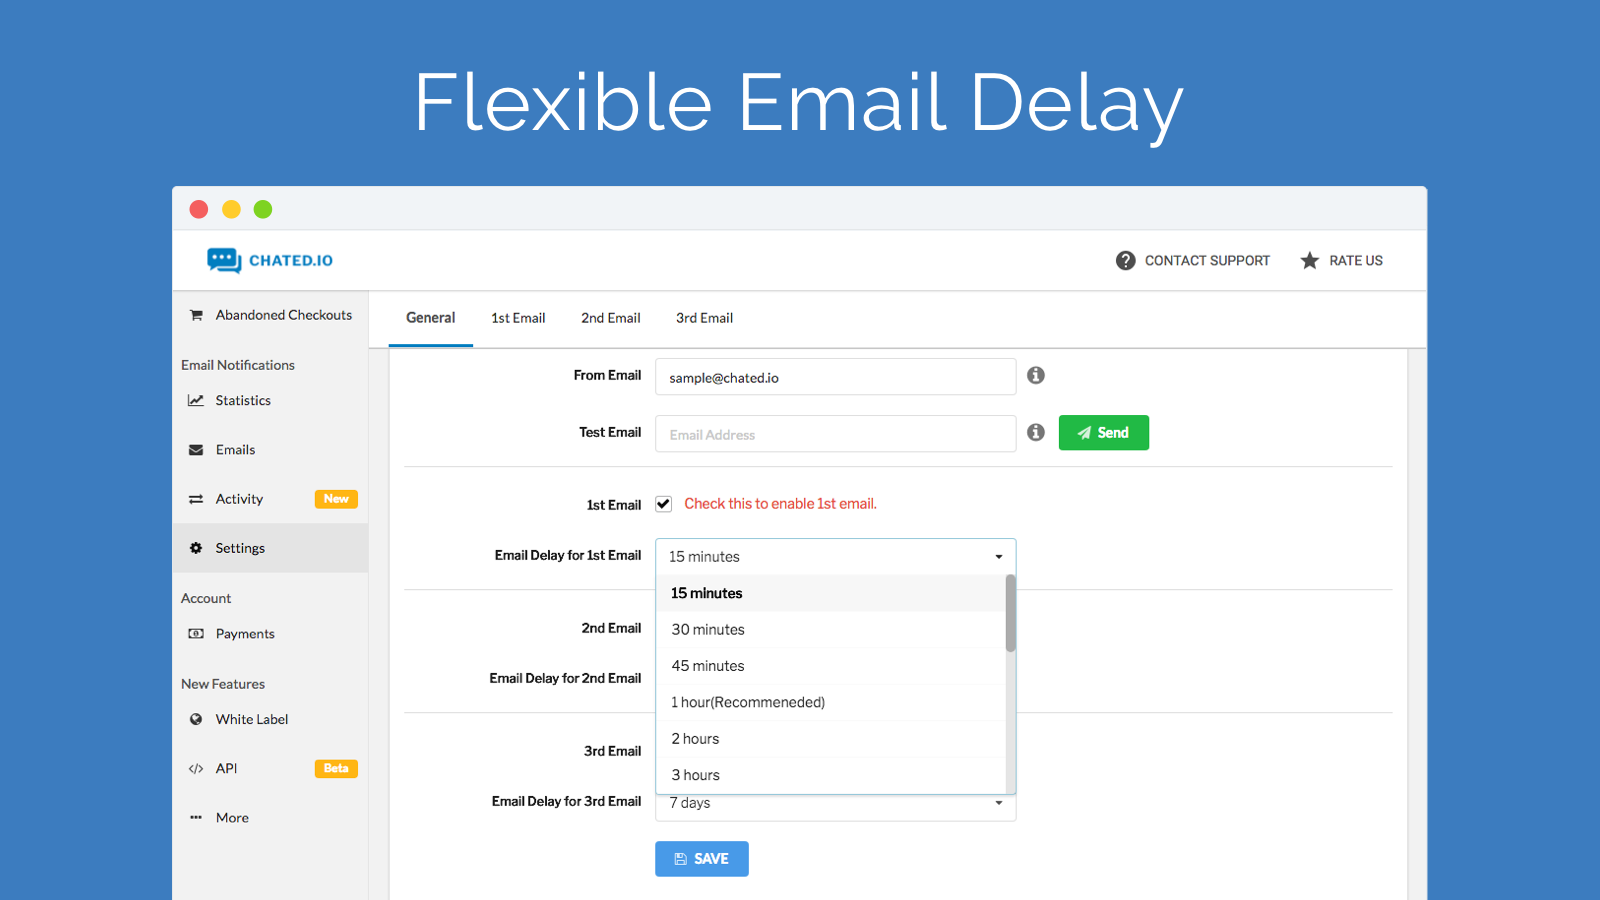 Flexible Email Delay